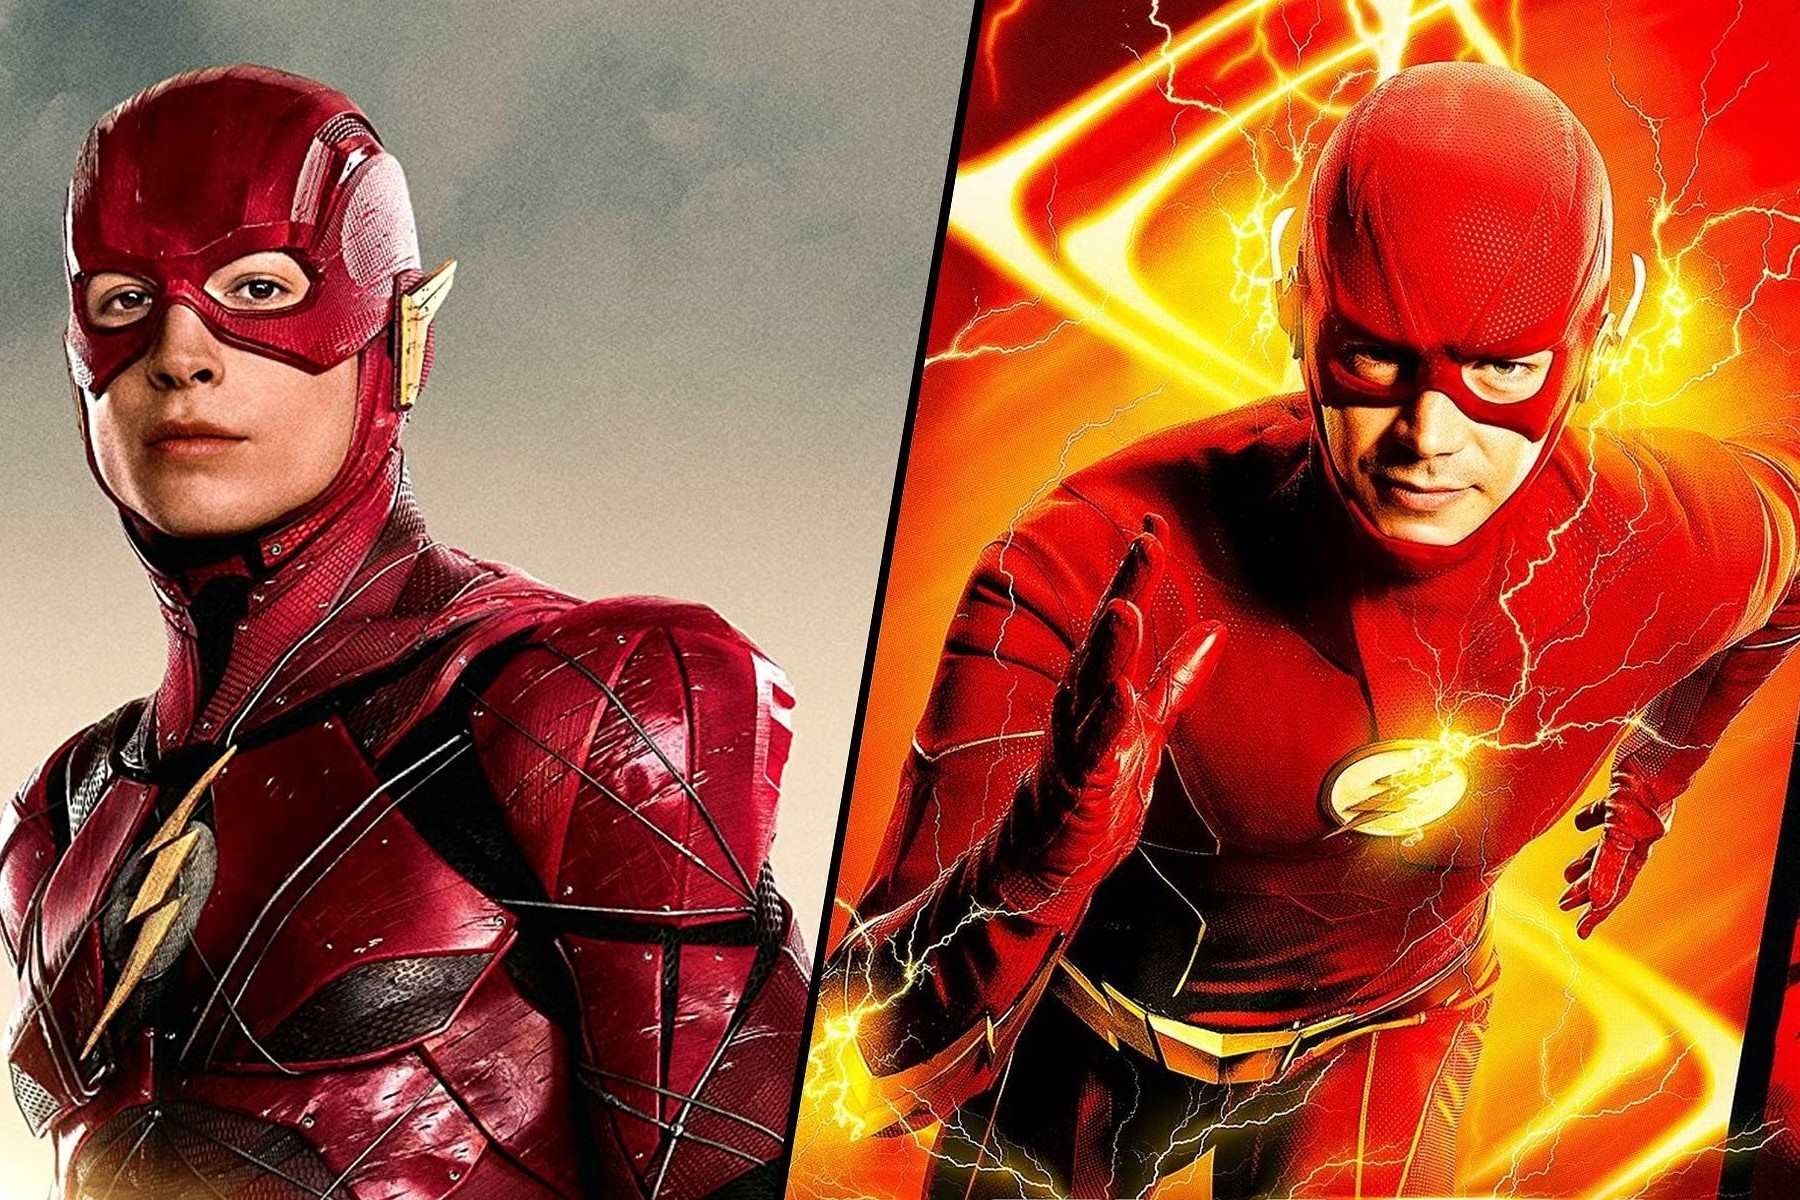 The Flash Movie: Grant Gustin Vs. Ezra Miller – Who Would Have Ruled The Box Office?